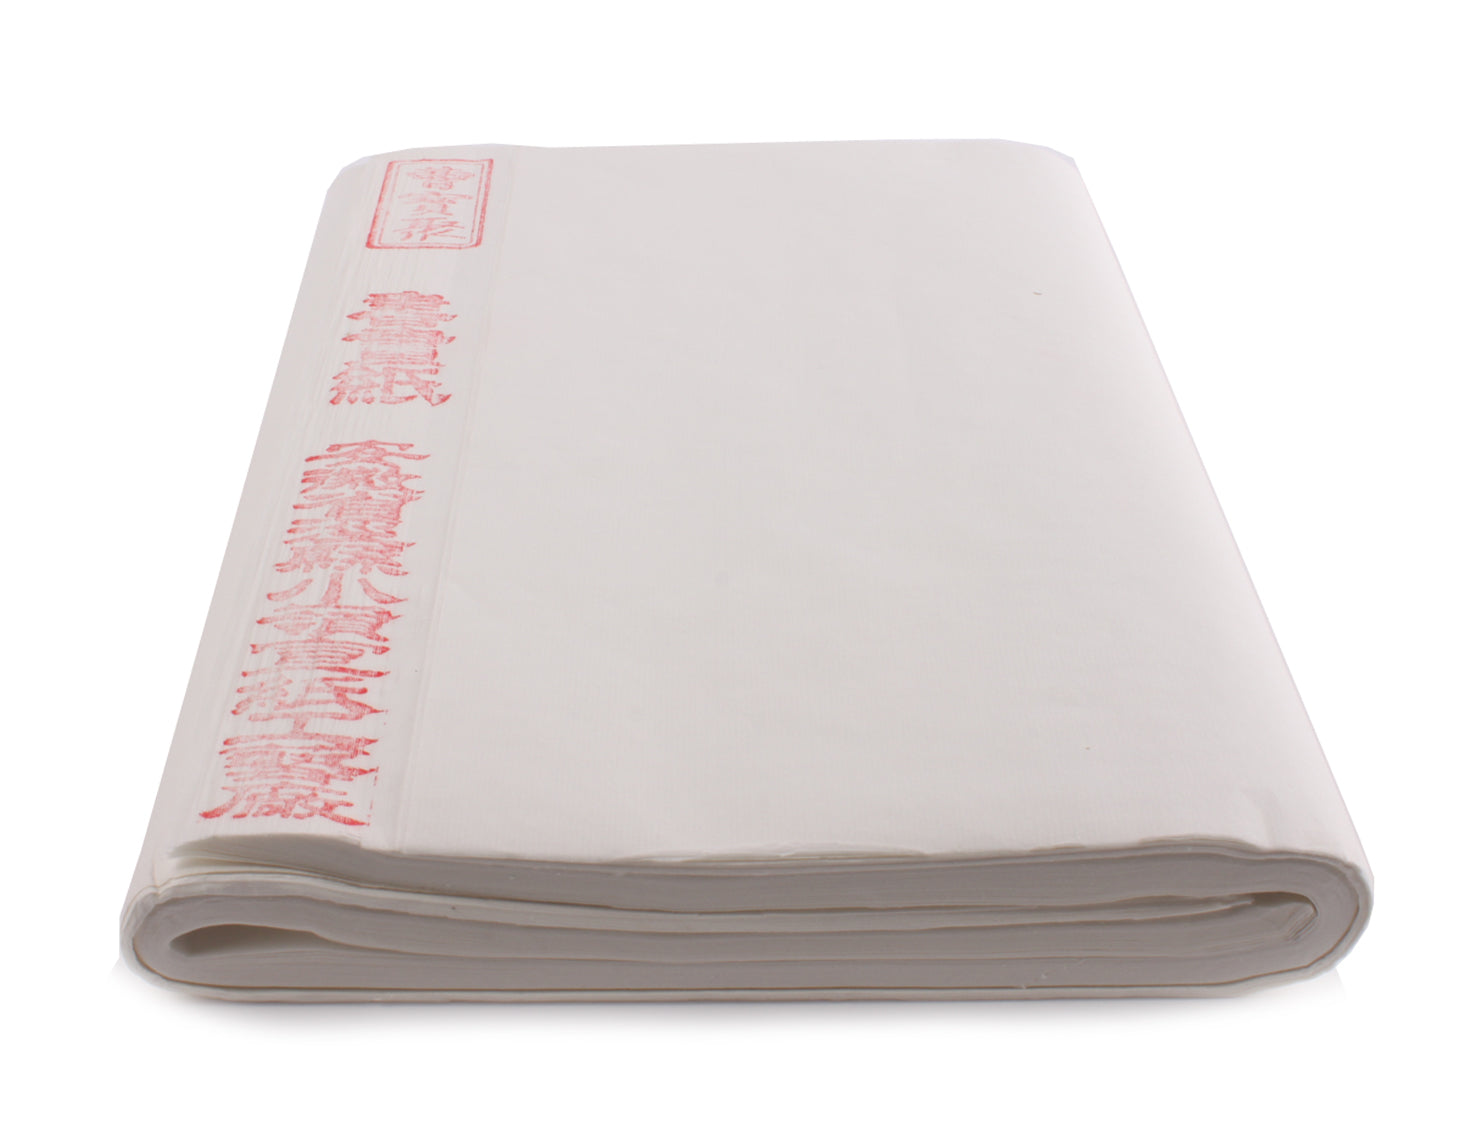 Anhui-made sized Chinese shuen or rice paper folded in a batch of hundred individual sheets with two folds - used for sumi painting or writing shodo calligraphy